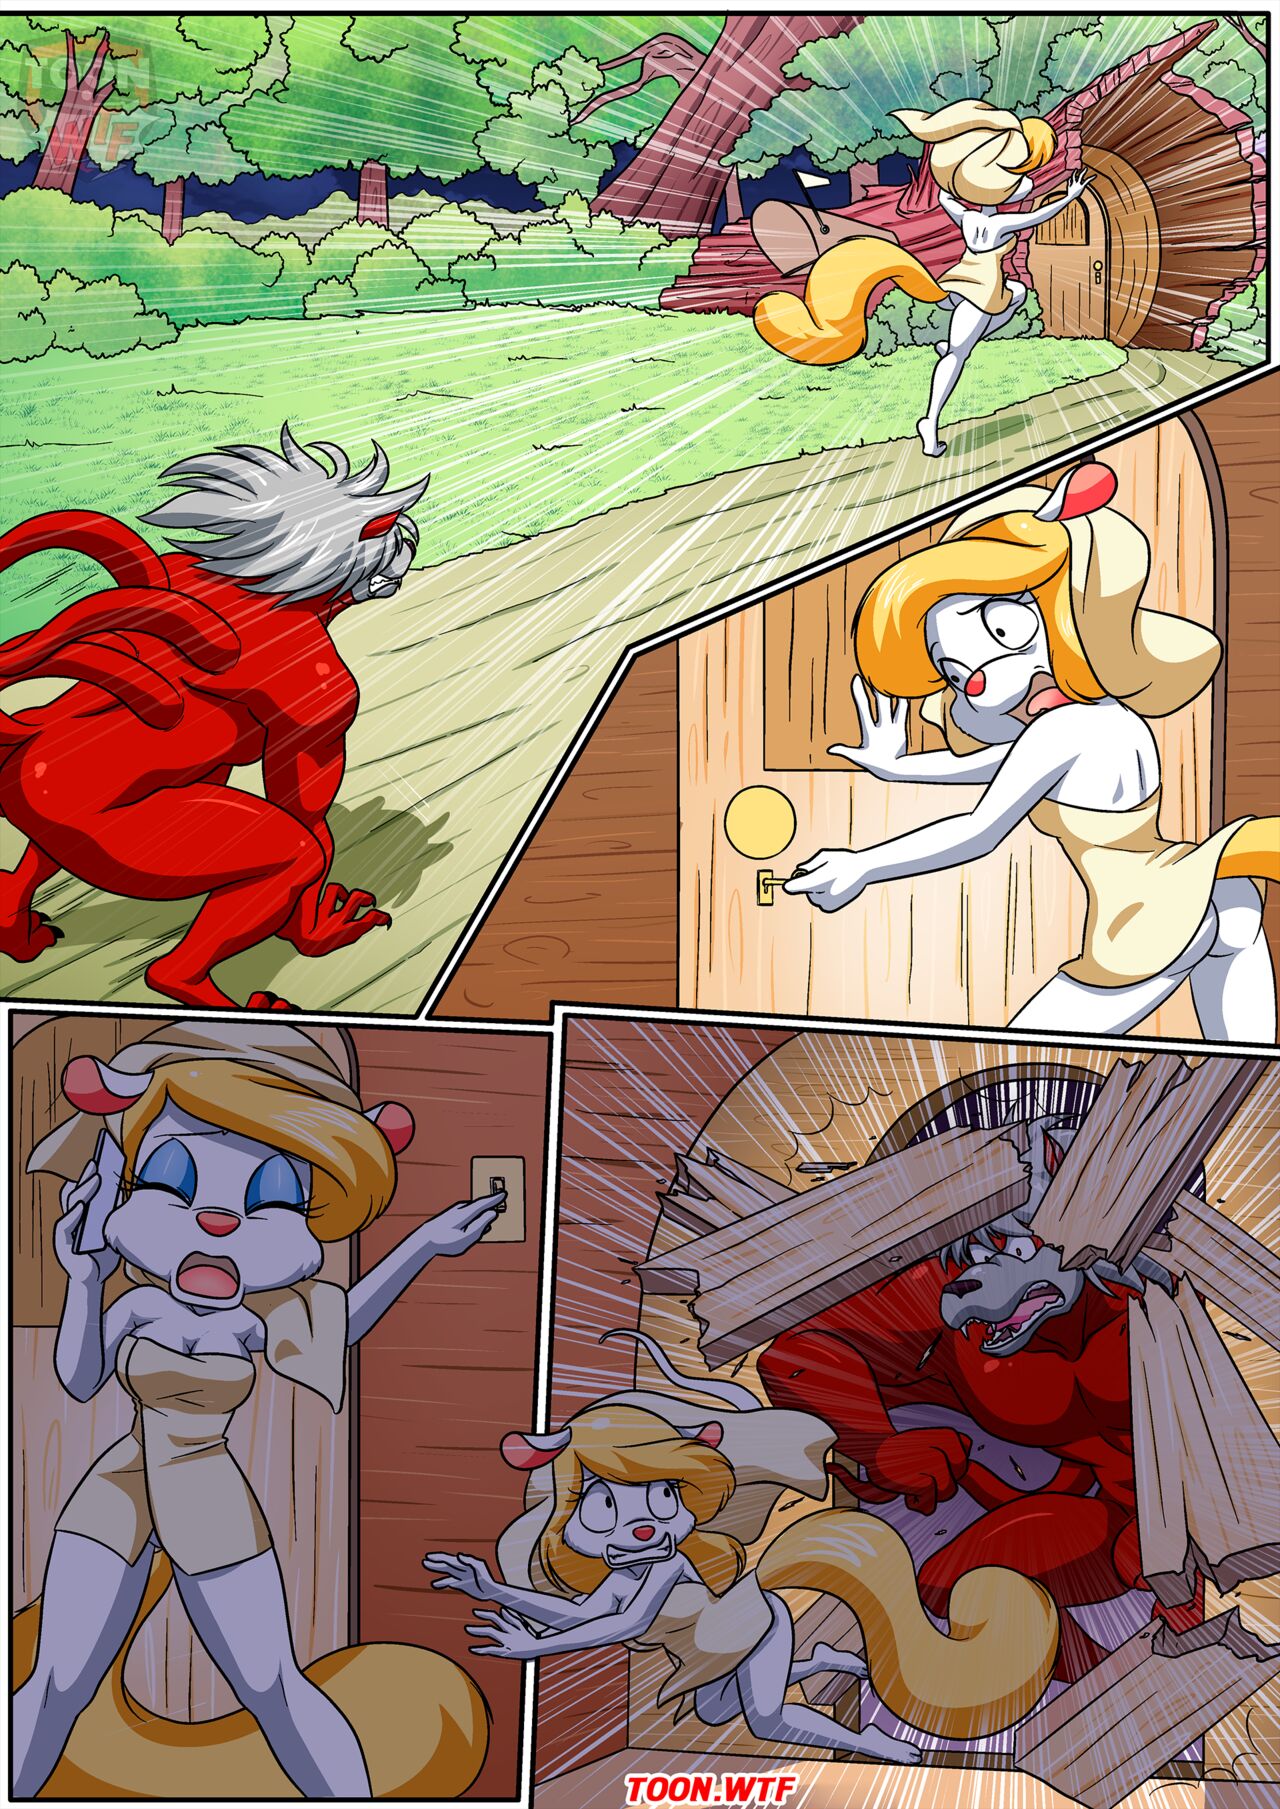 Wilford’s Revenge – Animaniacs by Palcomix